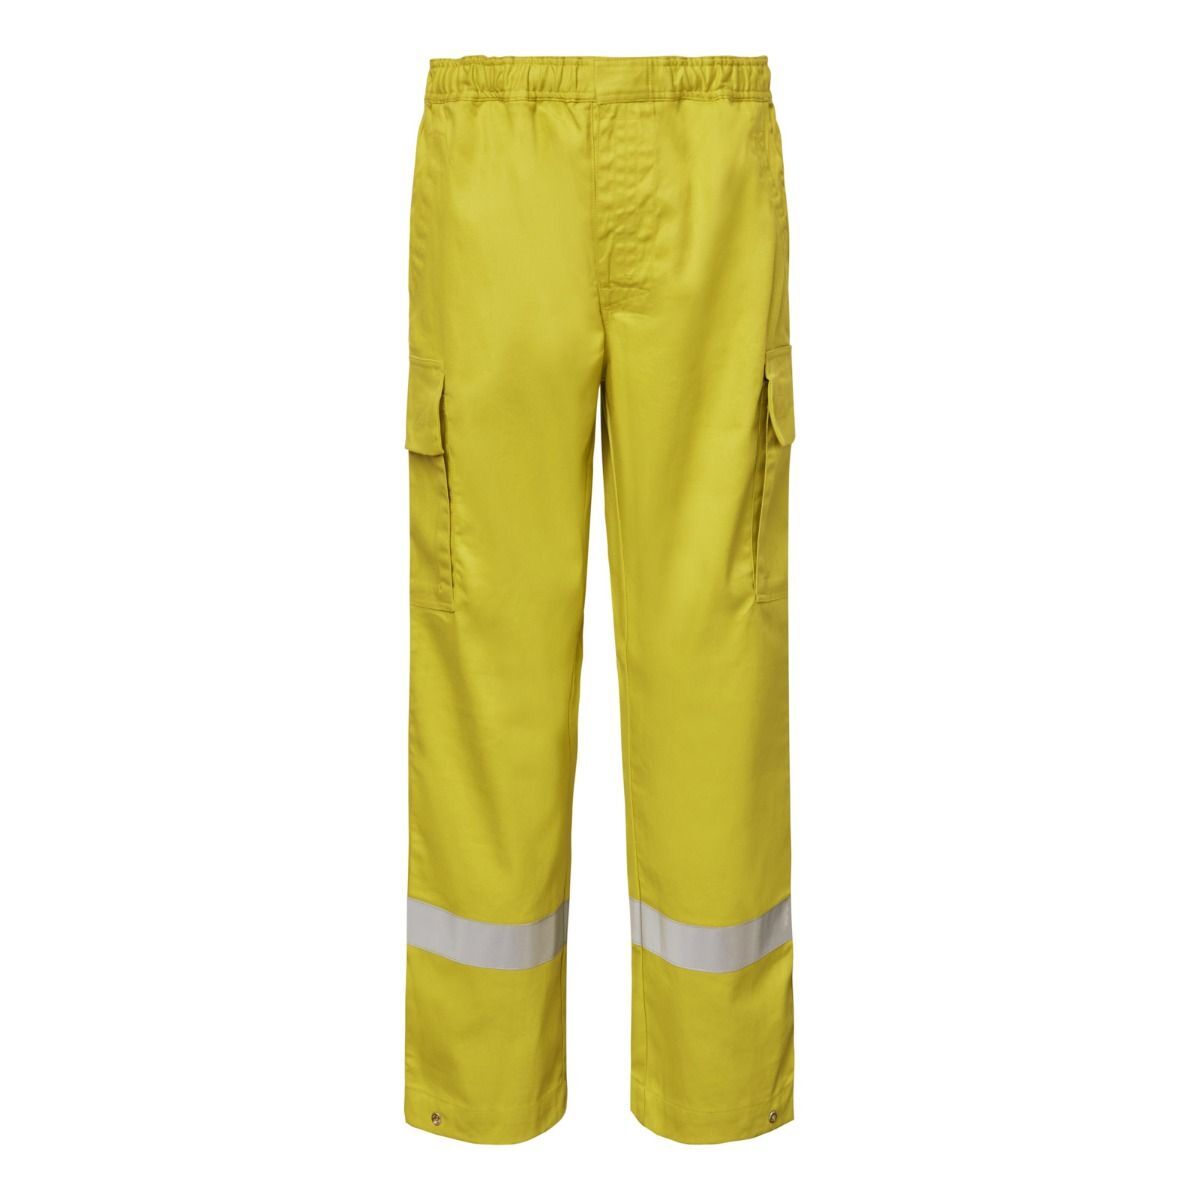 Complete outfit for firefighting PPE trainer